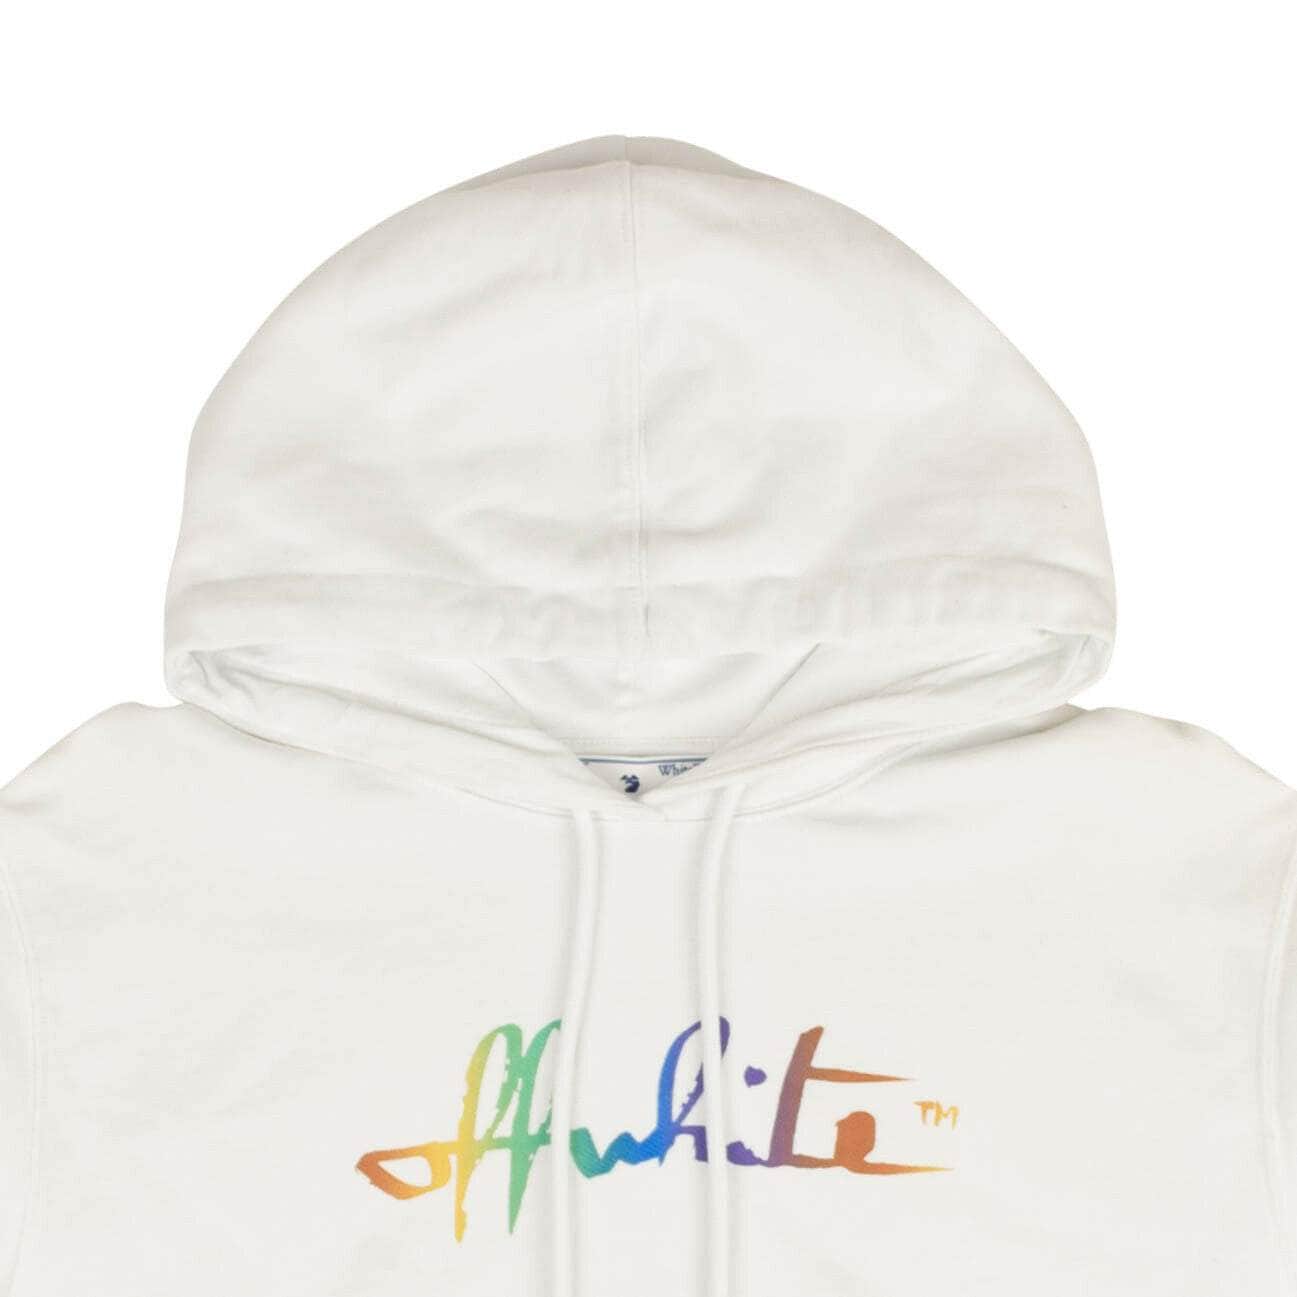 OFF-WHITE c/o VIRGIL ABLOH 500-750, channelenable-all, chicmi, couponcollection, gender-womens, main-clothing, off-white-c-o-virgil-abloh, size-s, size-xs, womens-hoodies-sweatshirts M / OWBB016R21JER0020184 White Rainbow Logo Hoodie 95-OFW-1264/M 95-OFW-1264/M